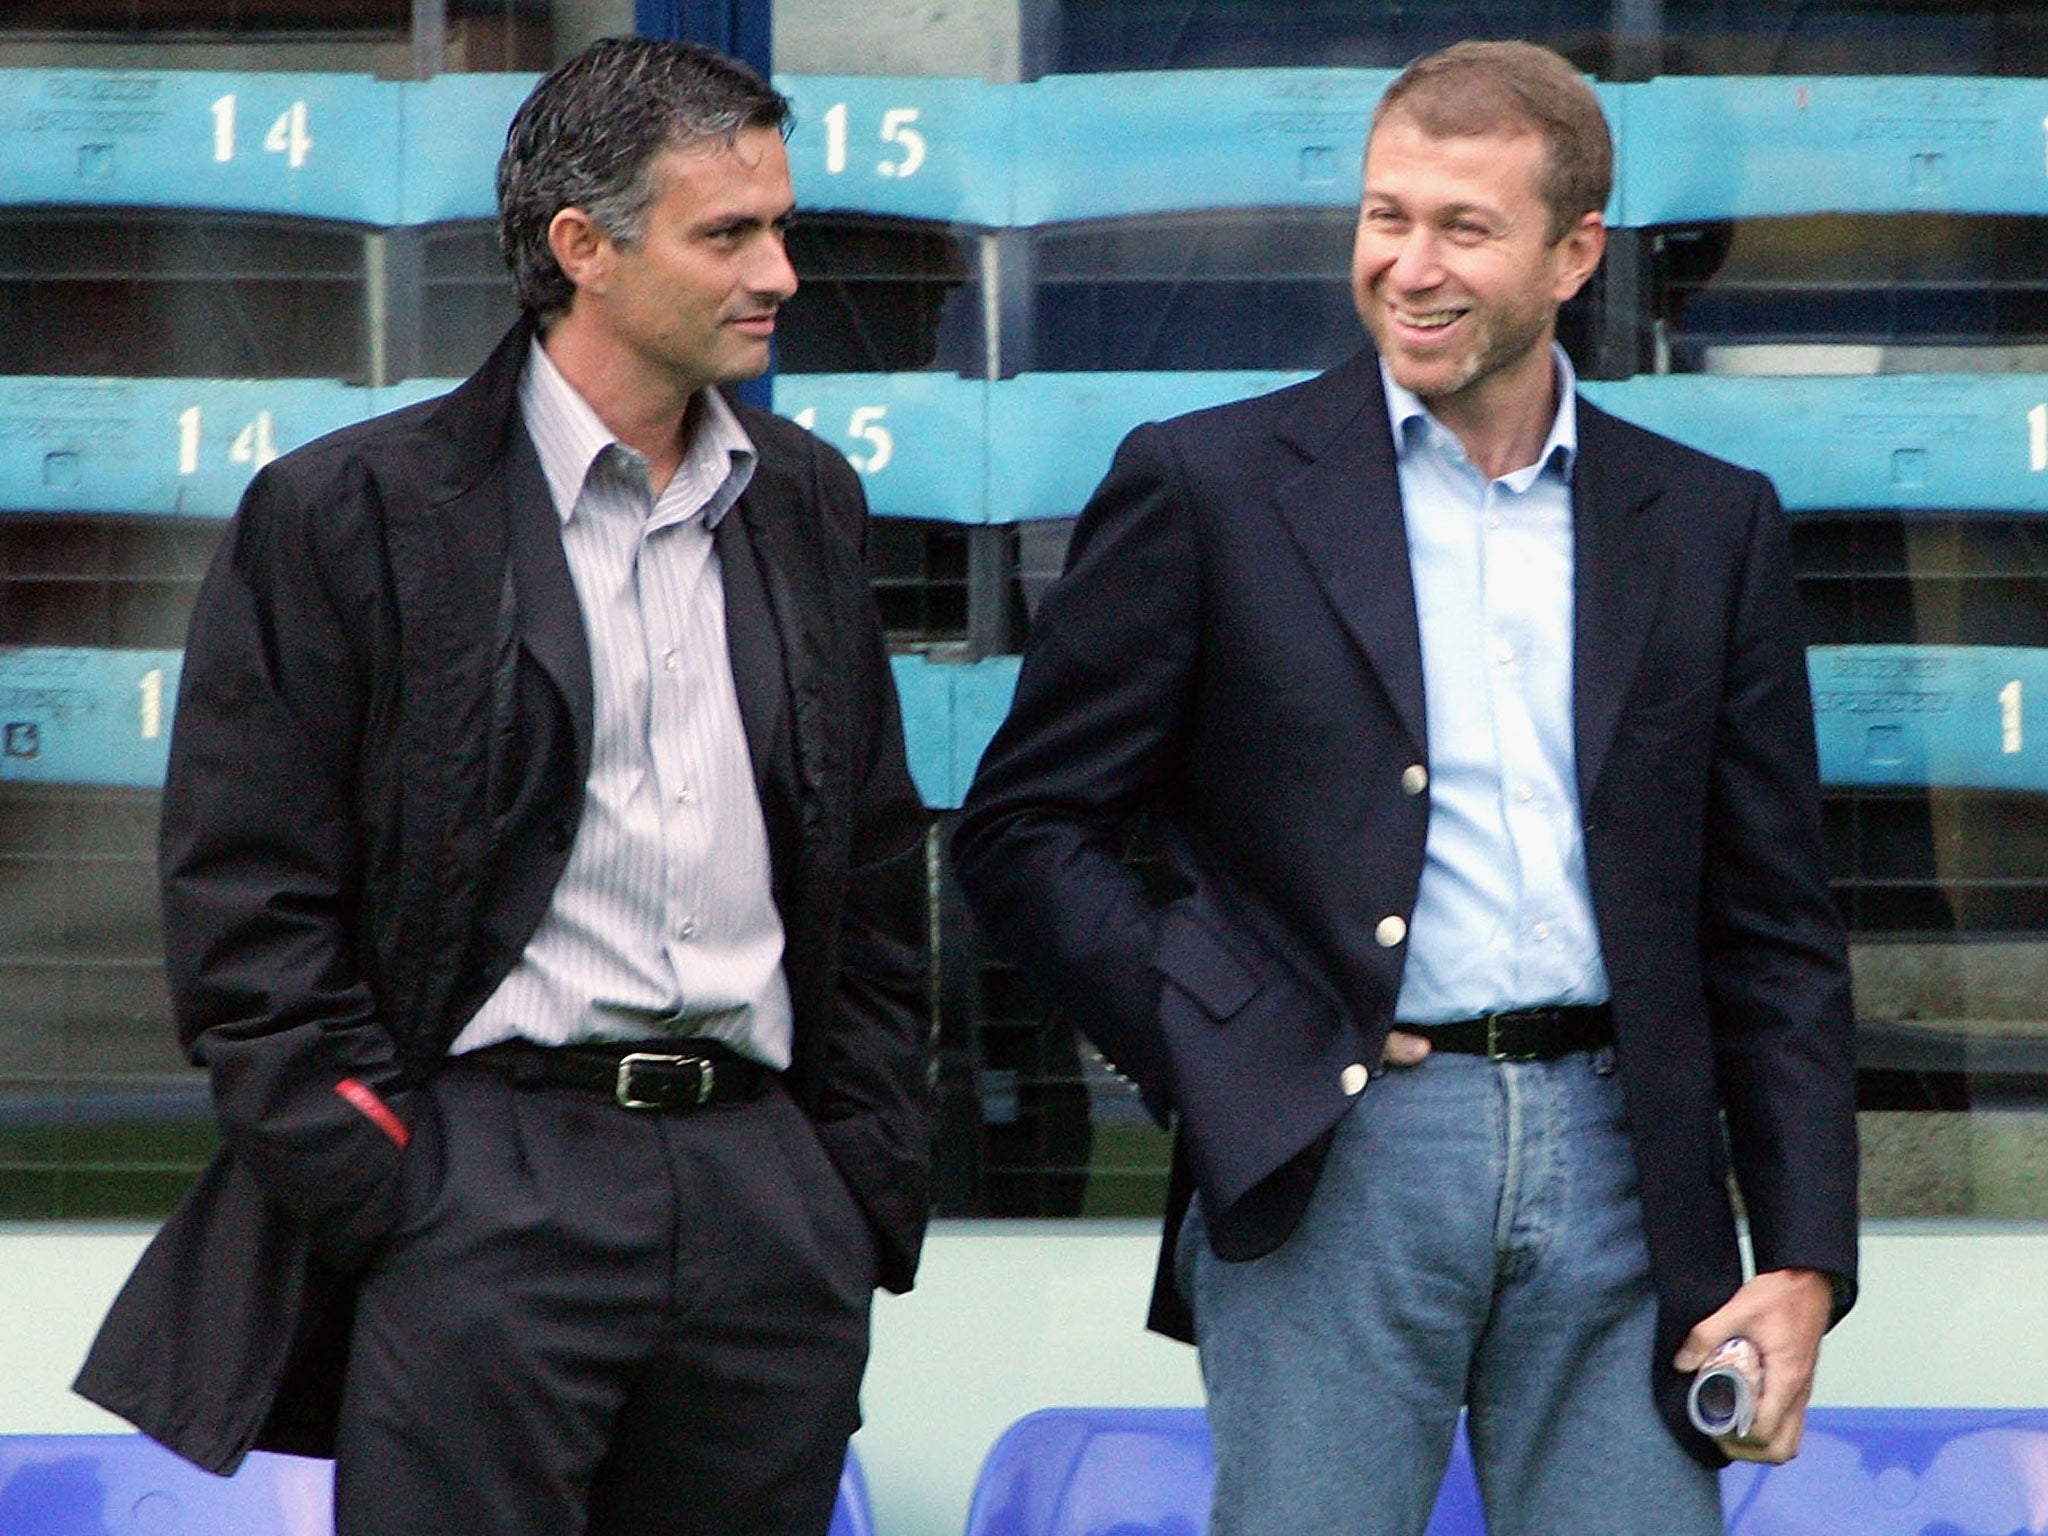 "If Roman Abramovich helped me out in training we would be bottom of the league and if I had to work in his world of big business, we would be bankrupt!" - on his relationship with the Chelsea owner.